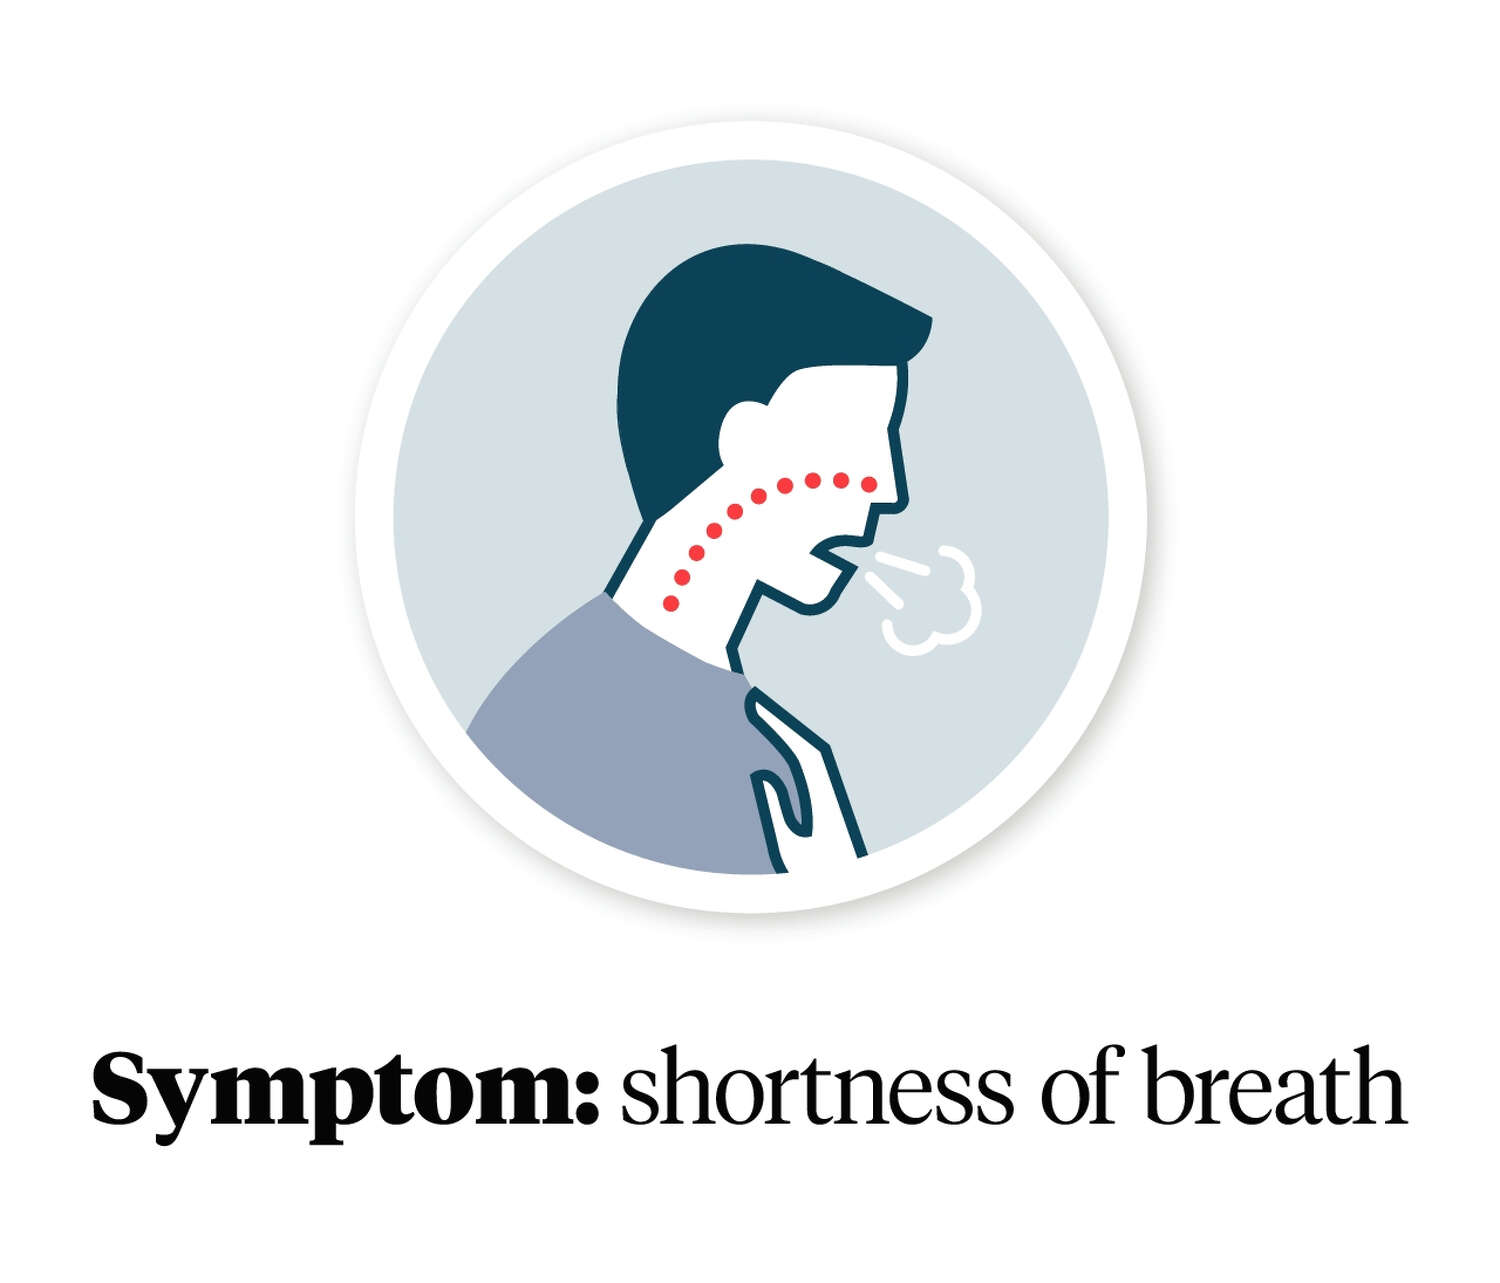 Graphic showing a person with shortness of breath